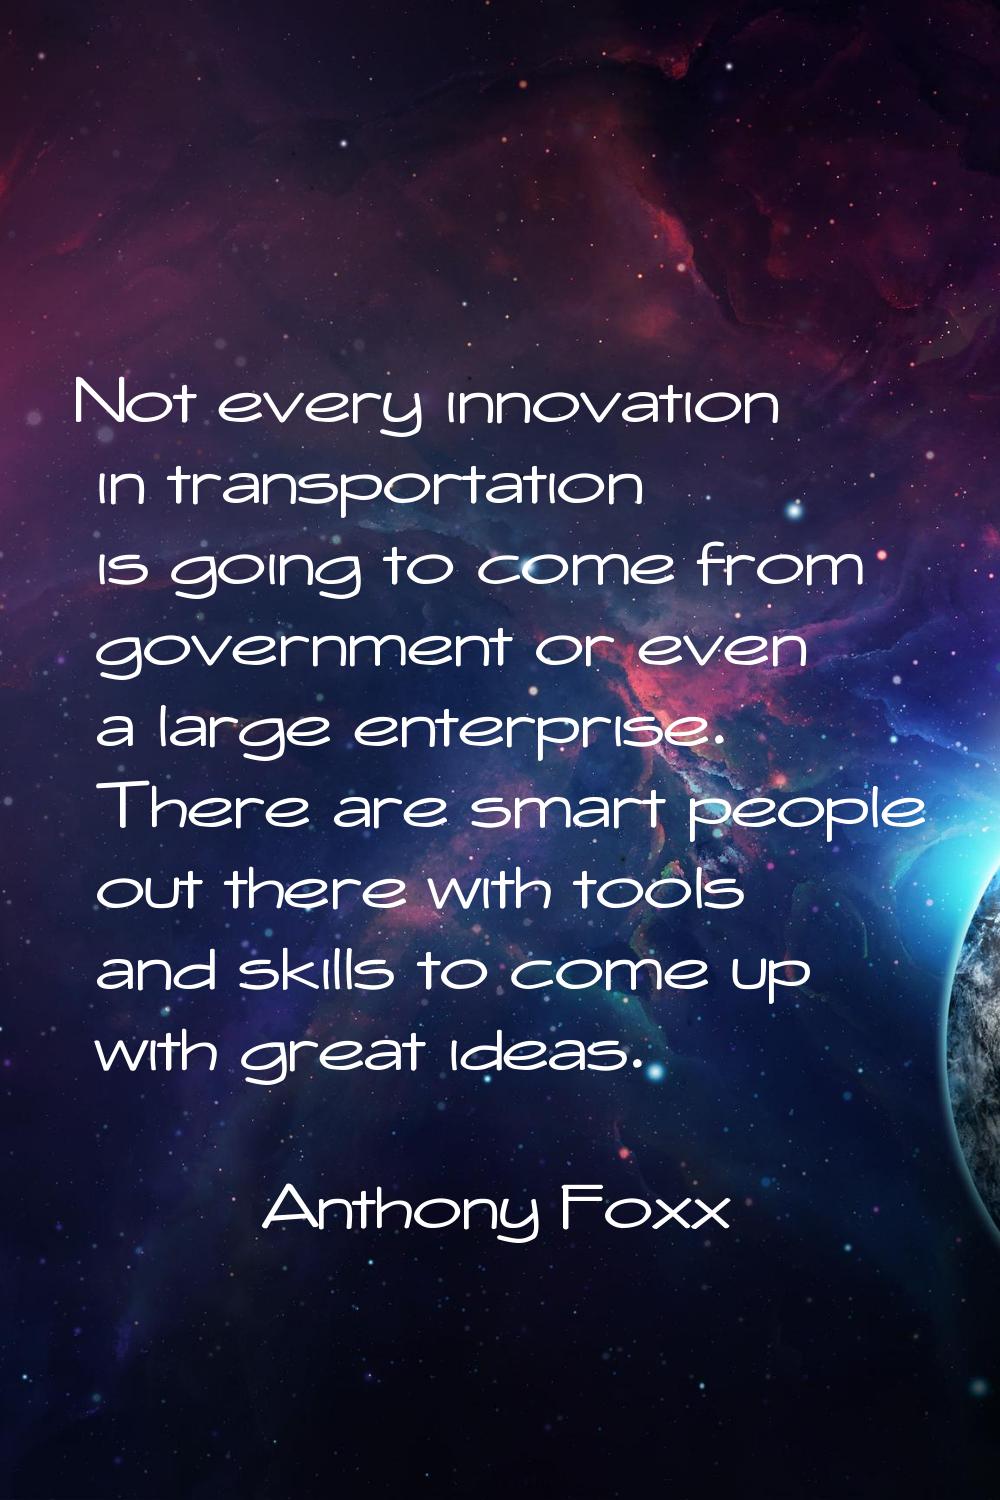 Not every innovation in transportation is going to come from government or even a large enterprise.